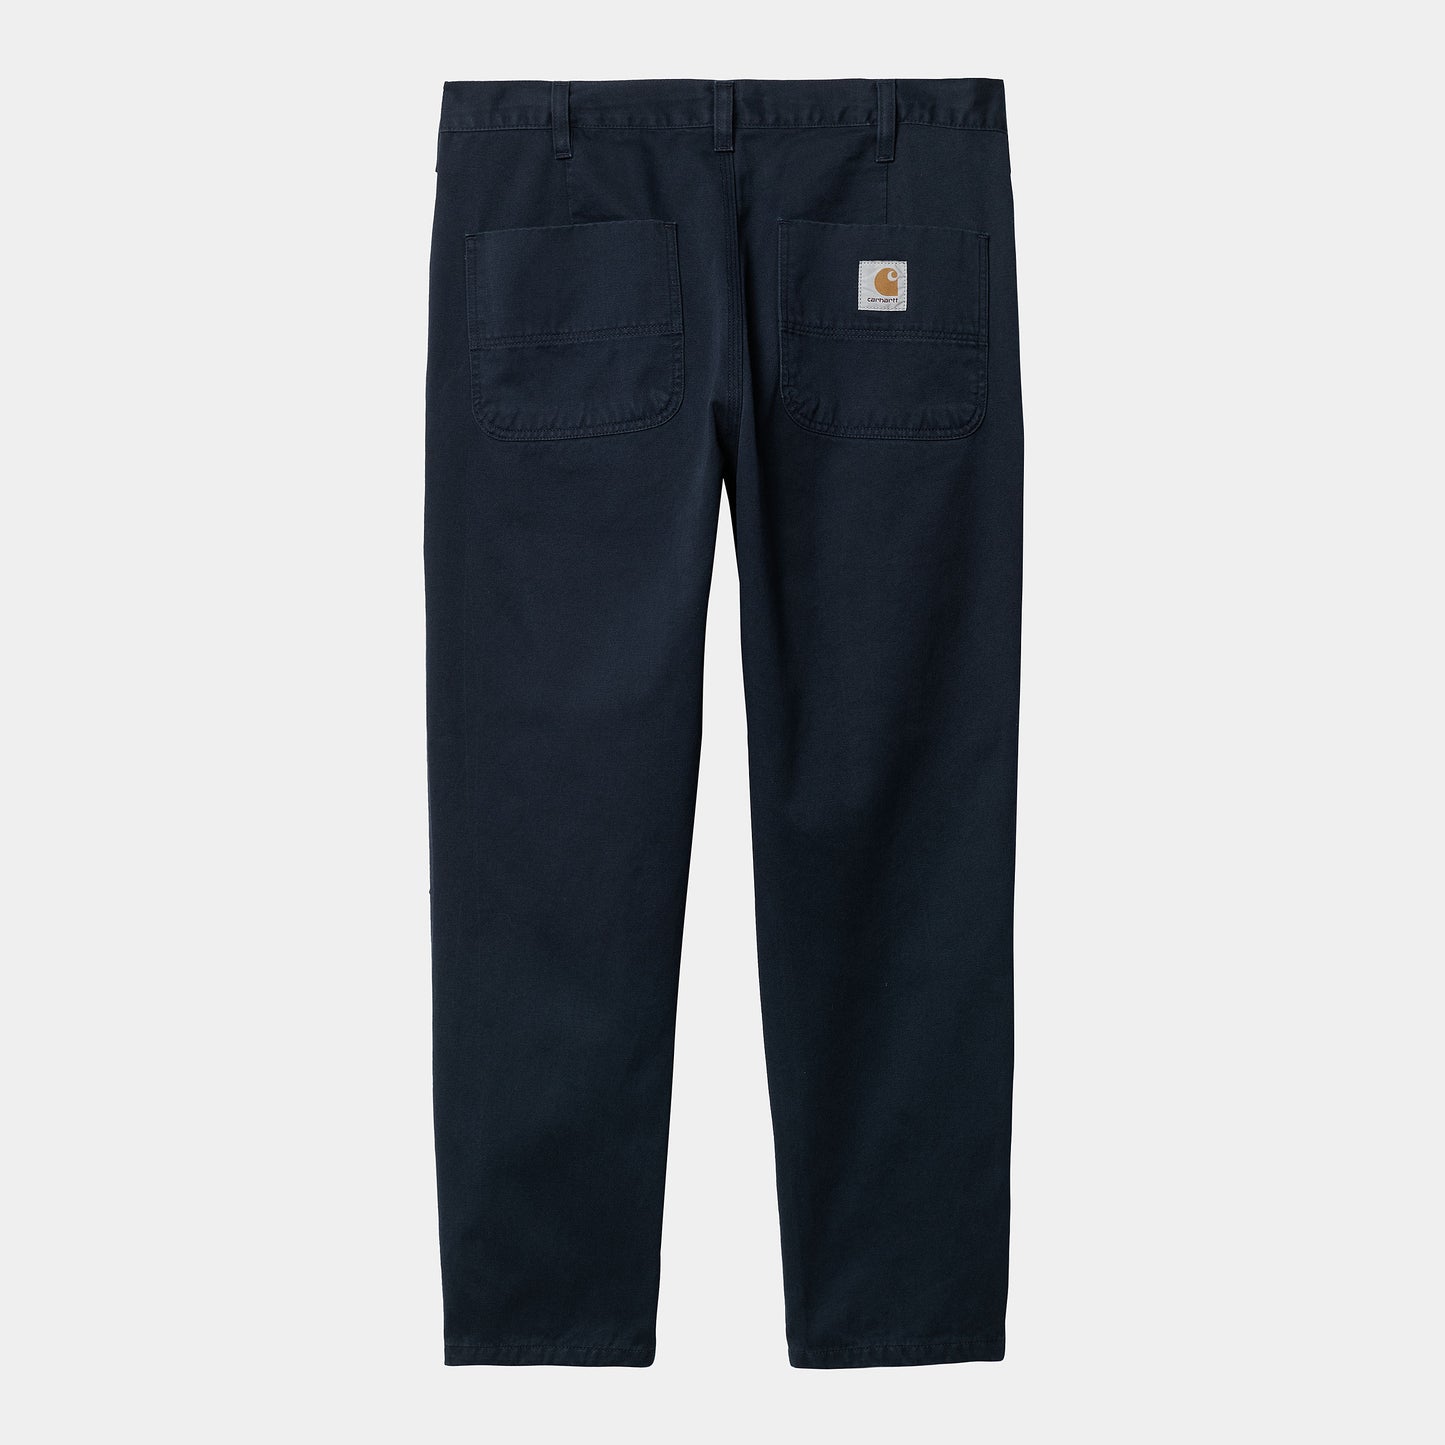 CARHARTT WIP ABBOT PANT - Atom Blue Stone Washed